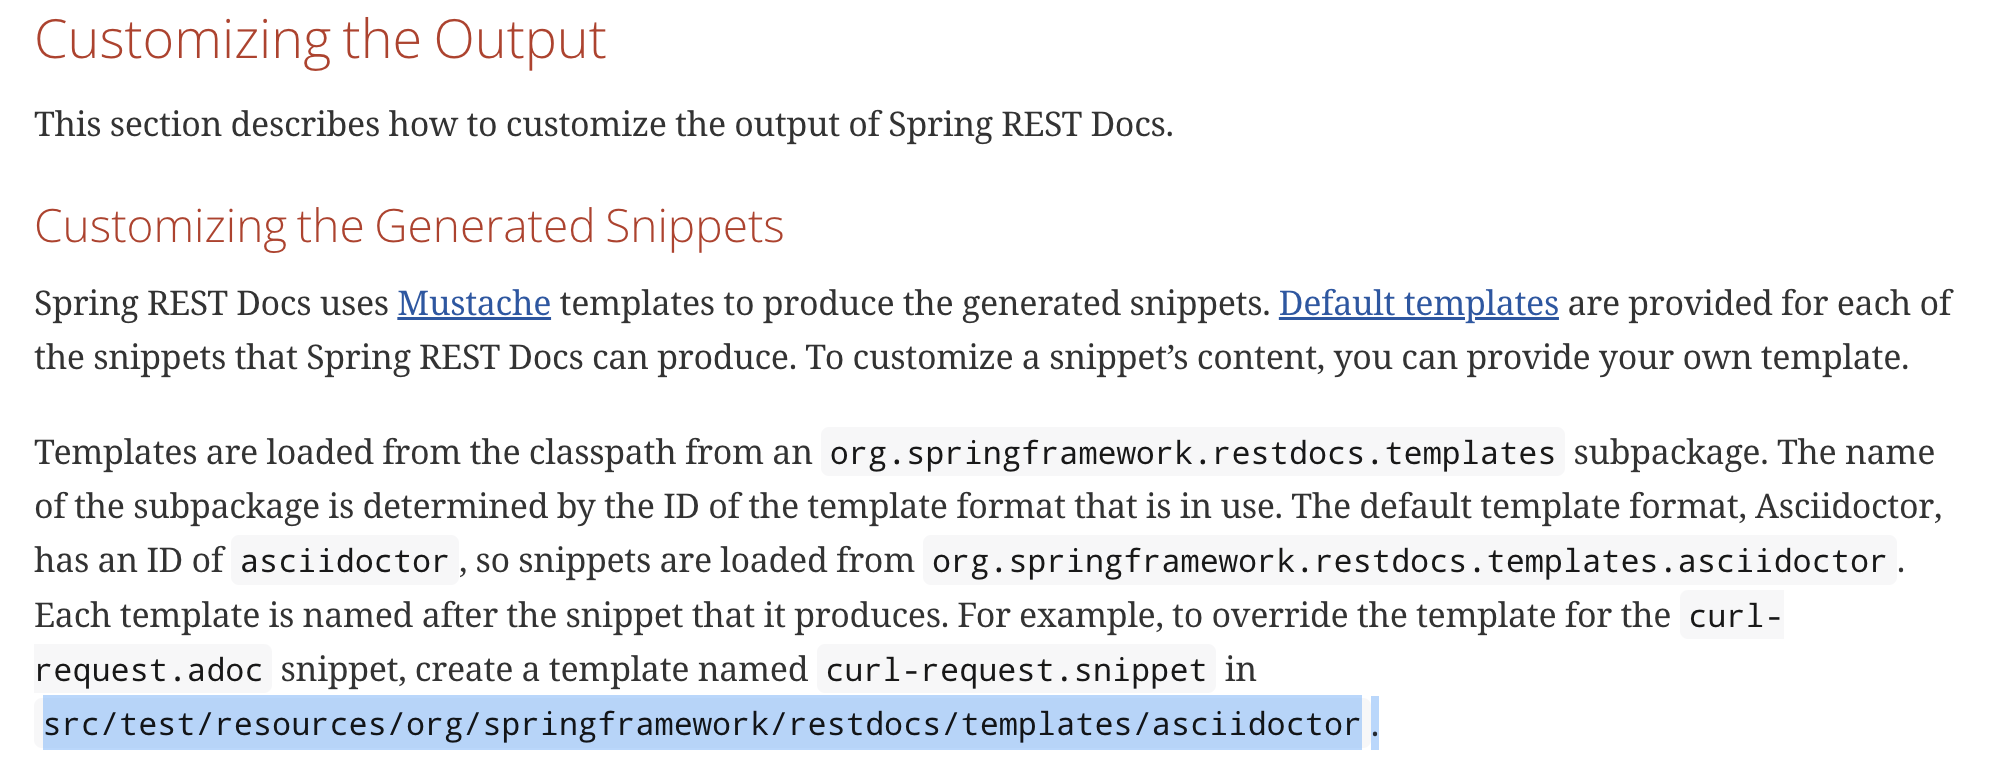 Spring REST Docs - Customizing the Generated Snippets